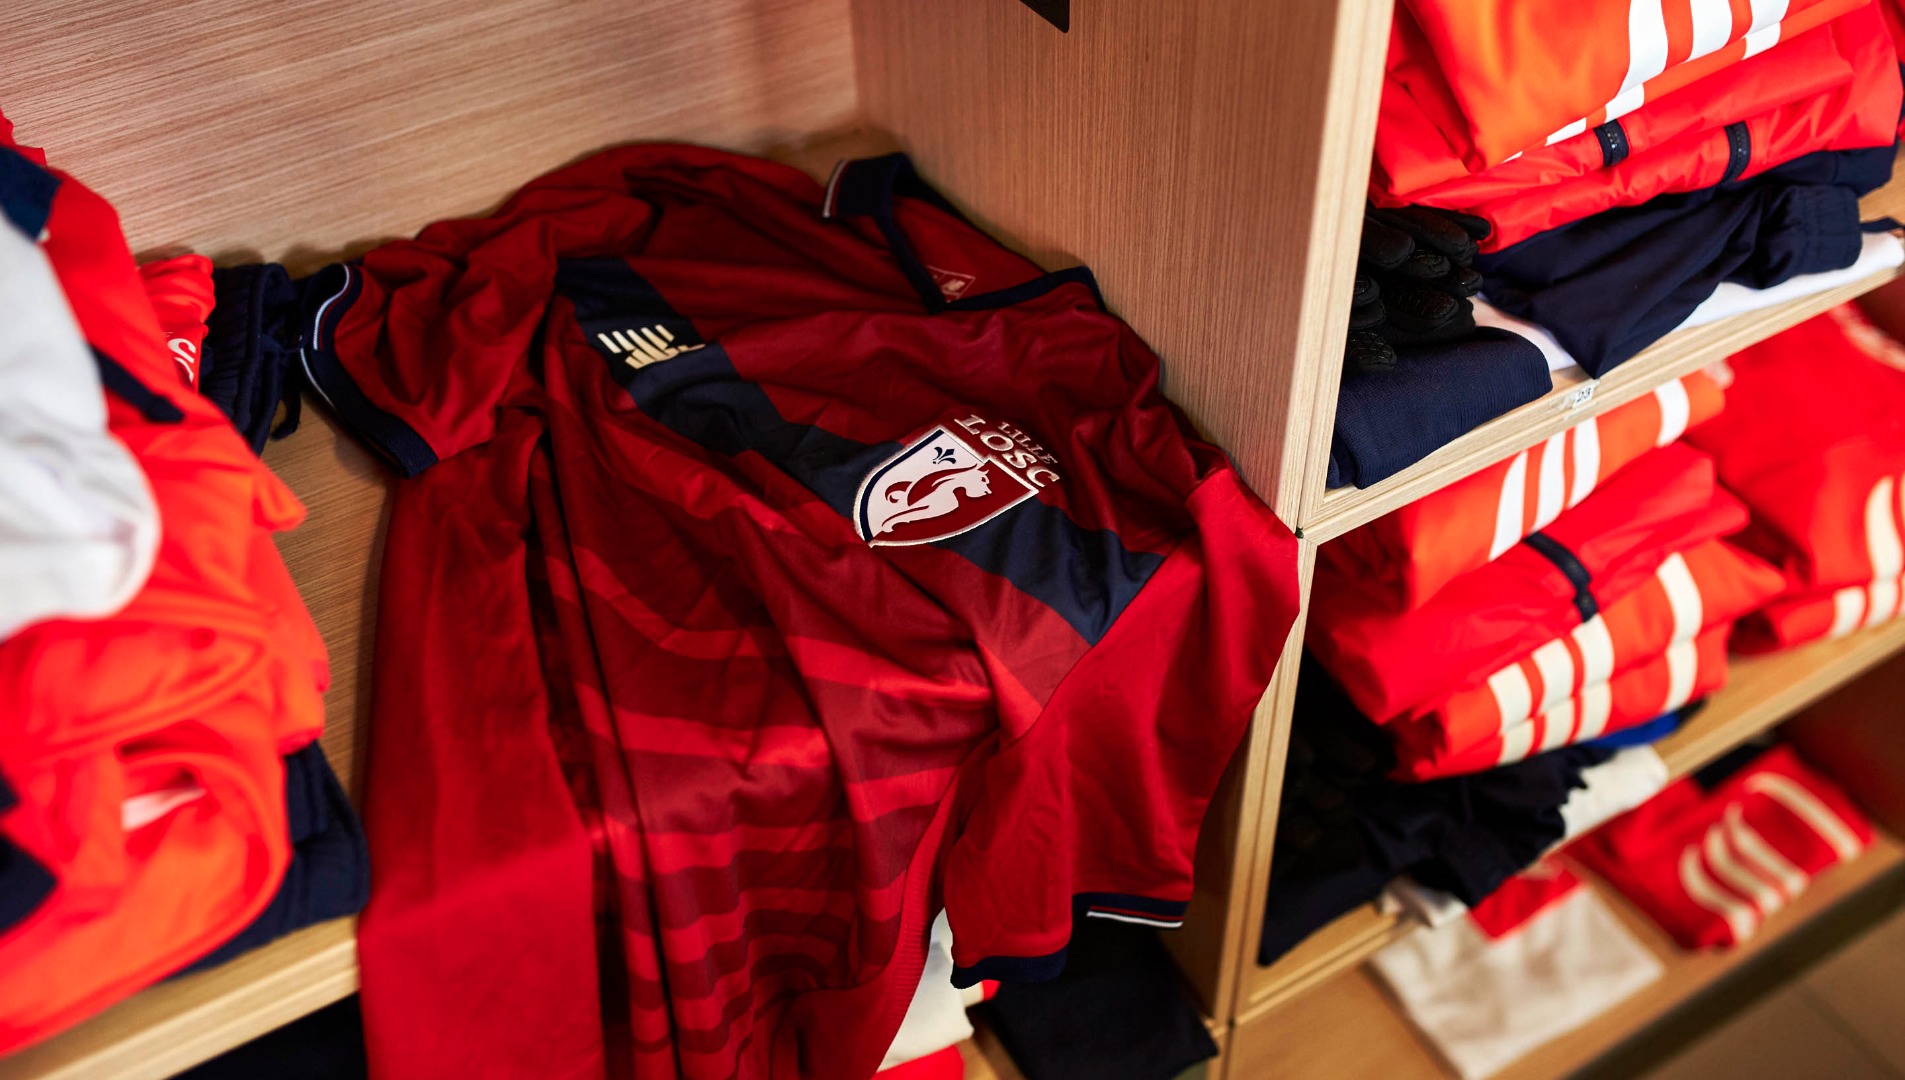 LOSC Lille 2016/17 home kits by New Balance - SoccerBible